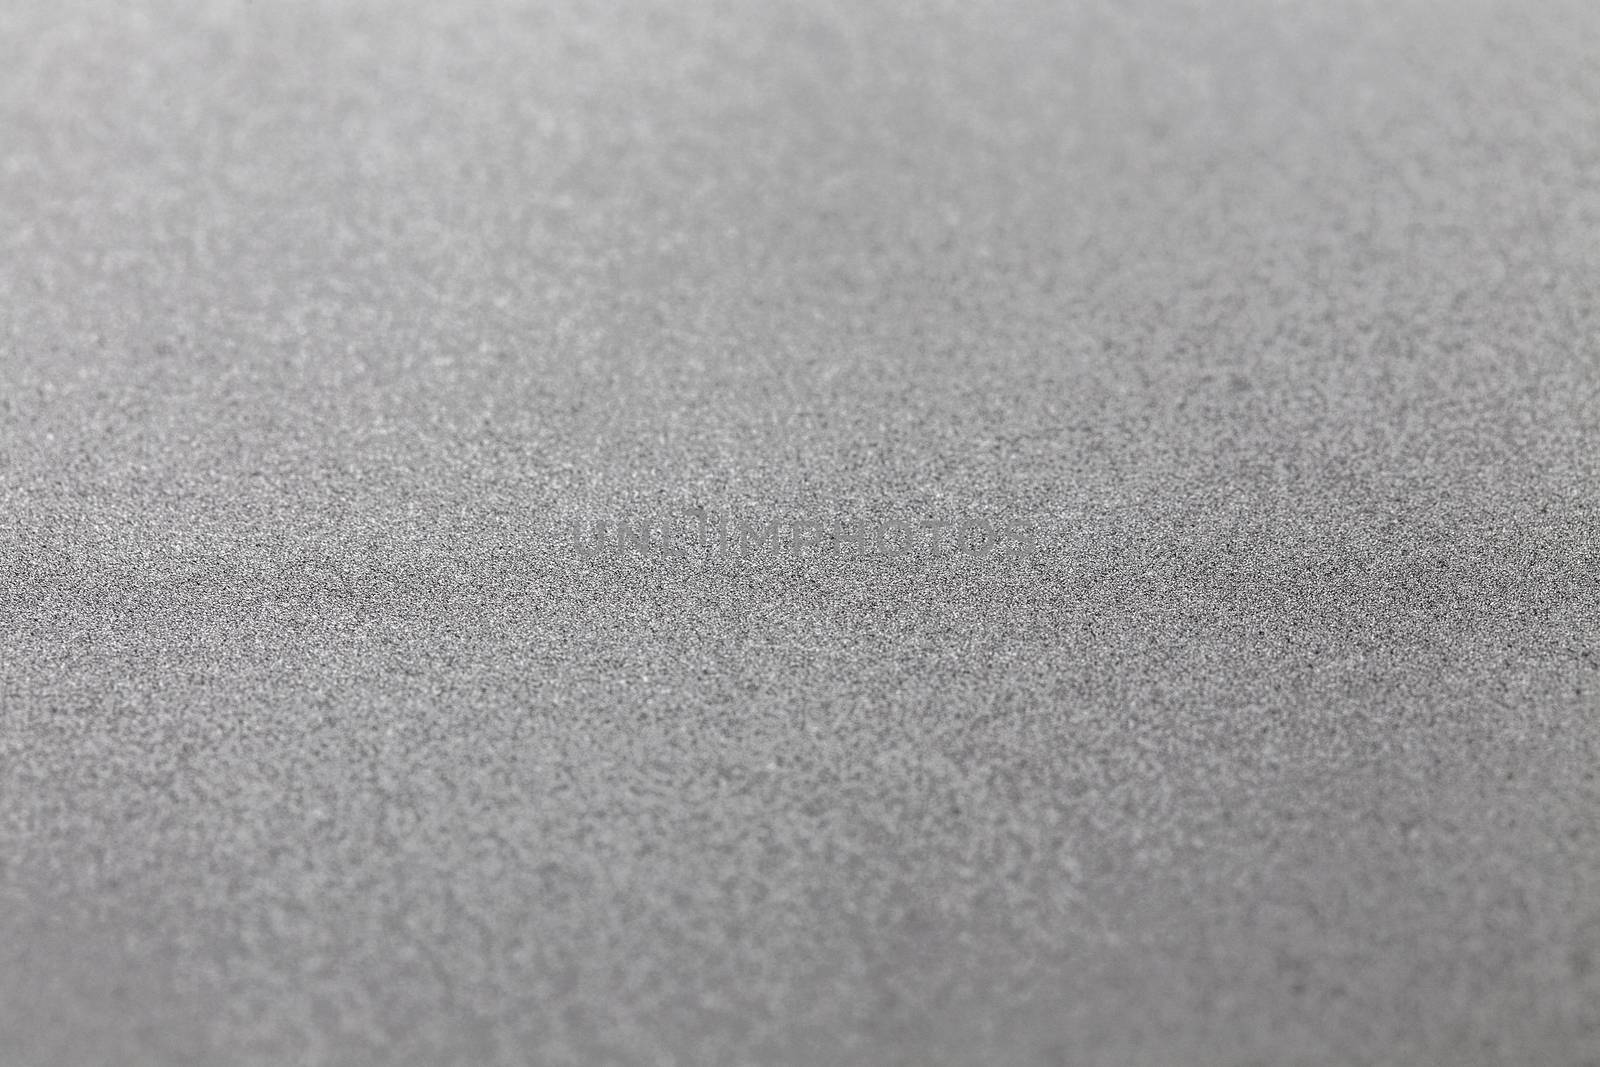 Grey silver metallic glitter shiny modern cold industrial textured background with selective focus